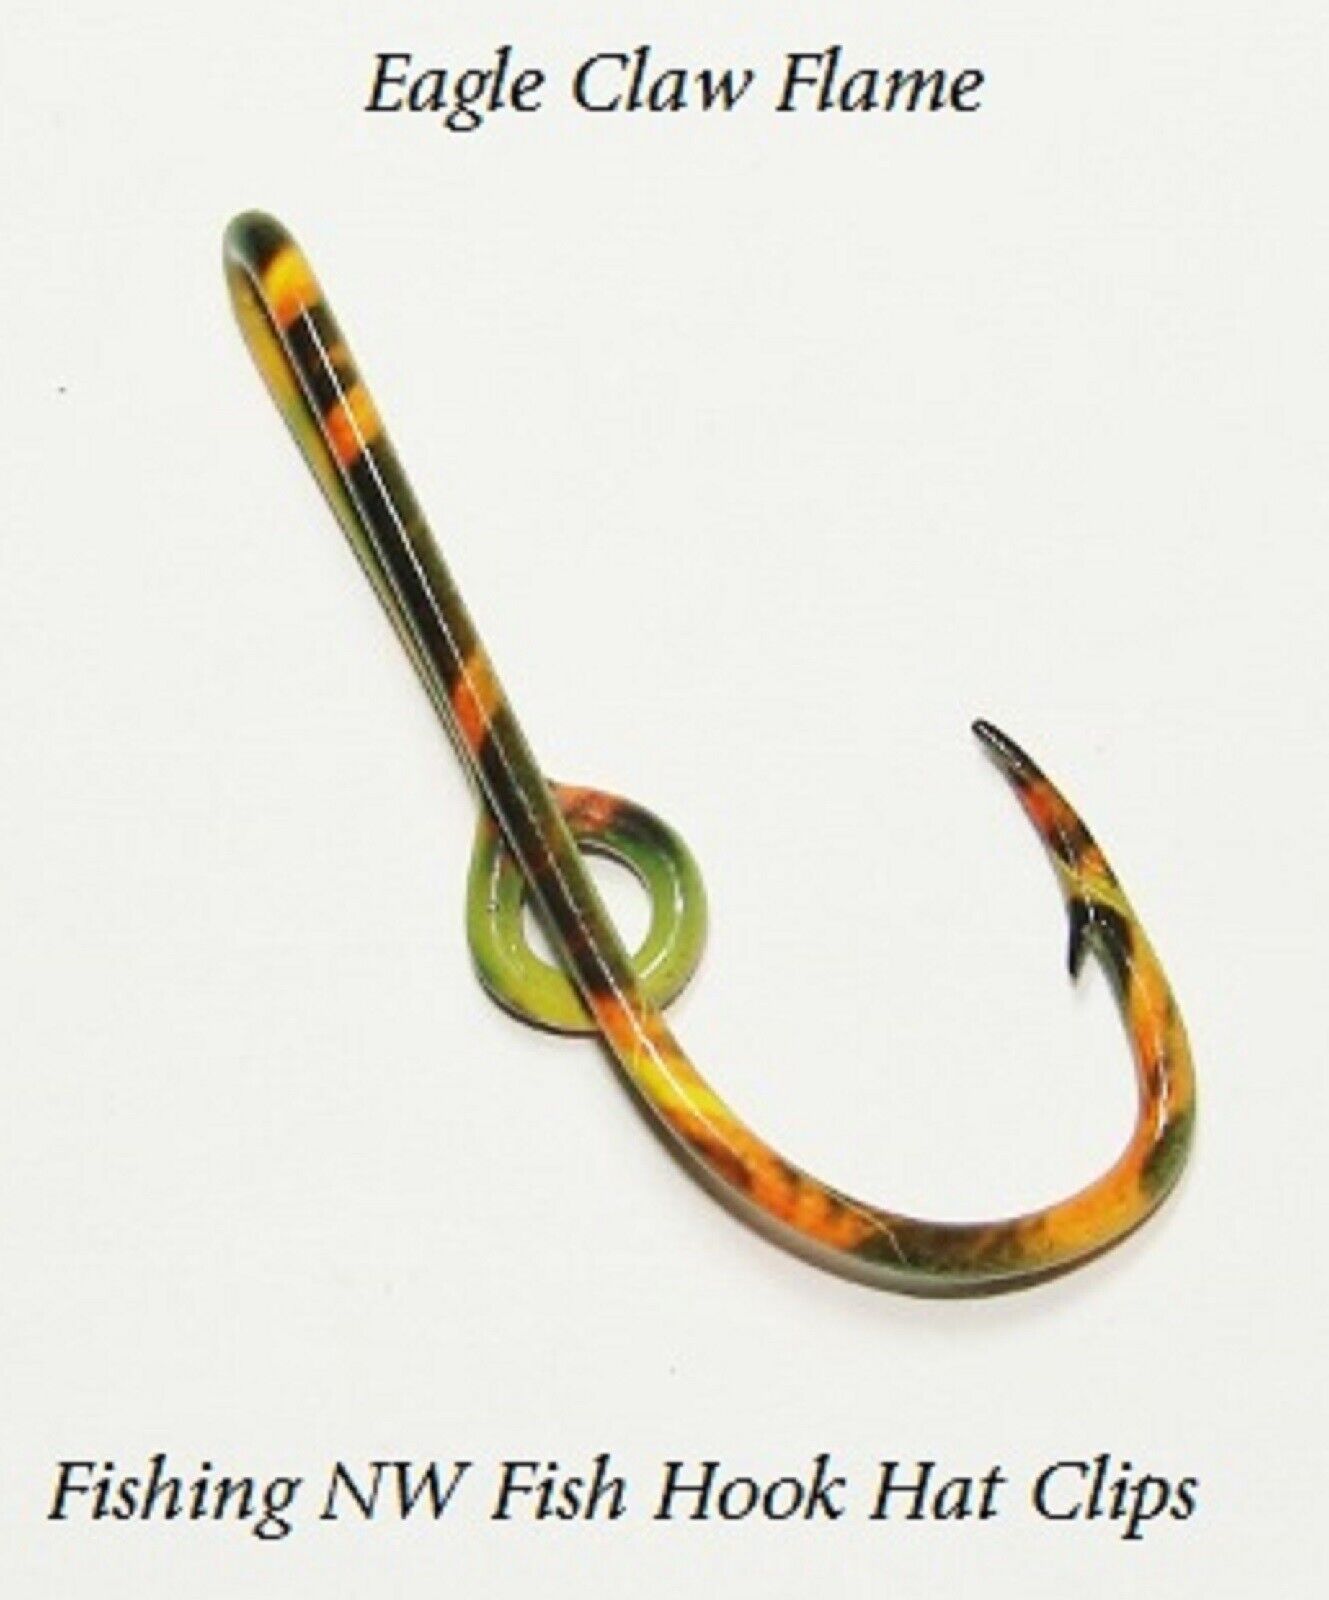 "1" Flame Colored Special Graphic Edition Fish Hook Hat Clip / Pin